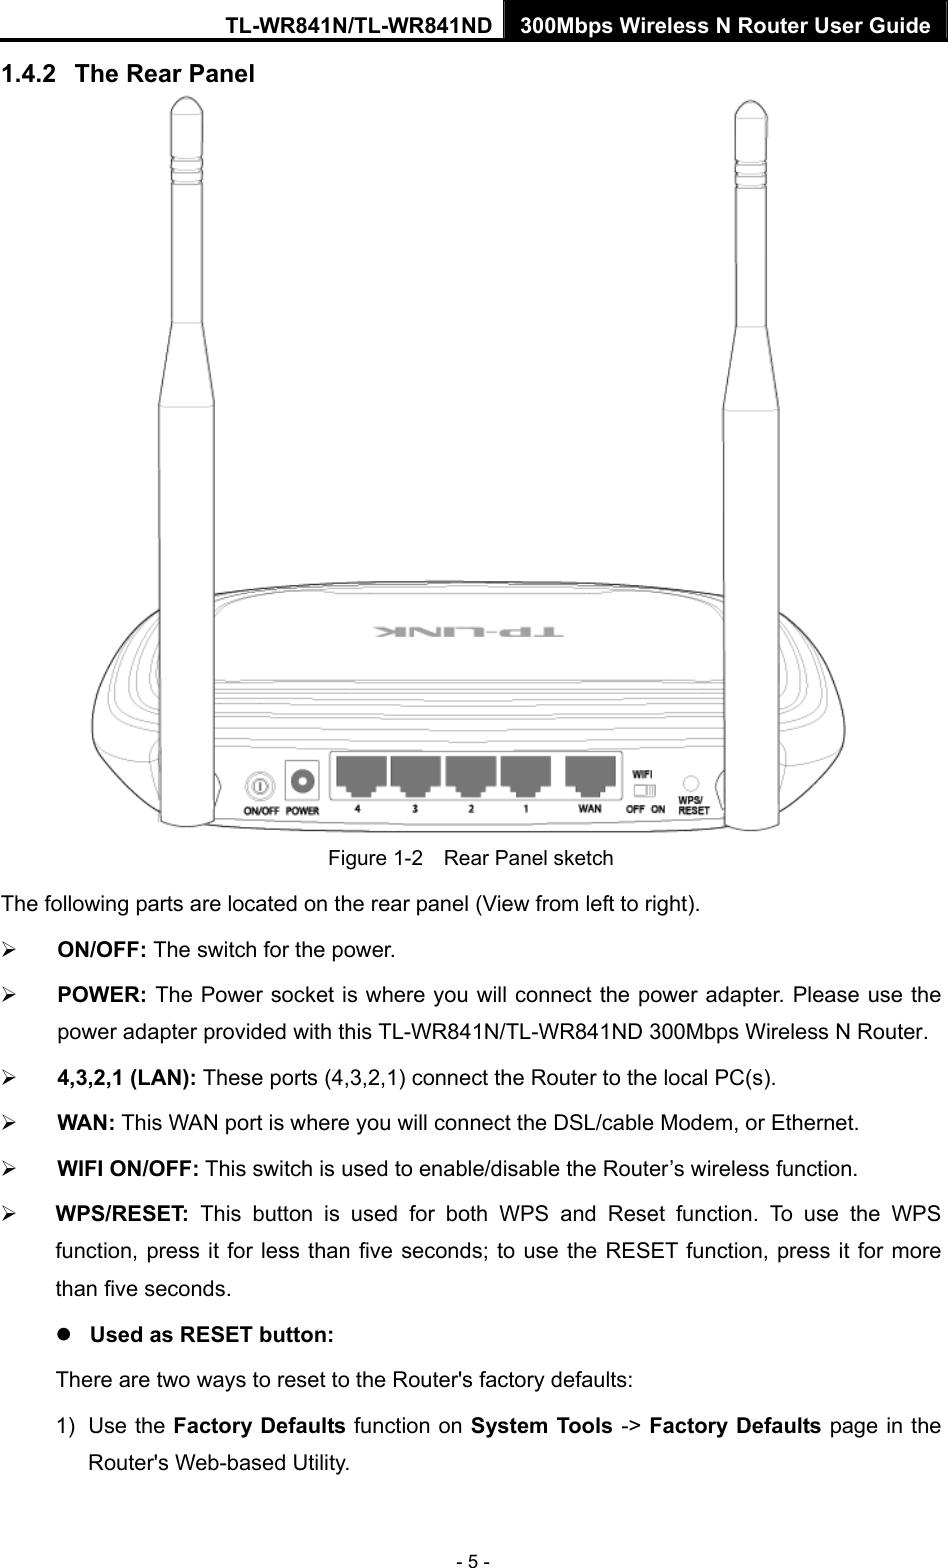 TL-WR841N/TL-WR841ND 300Mbps Wireless N Router User Guide - 5 - 1.4.2  The Rear Panel  Figure 1-2    Rear Panel sketch The following parts are located on the rear panel (View from left to right). ¾ ON/OFF: The switch for the power. ¾ POWER: The Power socket is where you will connect the power adapter. Please use the power adapter provided with this TL-WR841N/TL-WR841ND 300Mbps Wireless N Router. ¾ 4,3,2,1 (LAN): These ports (4,3,2,1) connect the Router to the local PC(s). ¾ WAN: This WAN port is where you will connect the DSL/cable Modem, or Ethernet. ¾ WIFI ON/OFF: This switch is used to enable/disable the Router’s wireless function. ¾ WPS/RESET:  This button is used for both WPS and Reset function. To use the WPS function, press it for less than five seconds; to use the RESET function, press it for more than five seconds.   z Used as RESET button: There are two ways to reset to the Router&apos;s factory defaults: 1) Use the Factory Defaults function on System Tools -&gt; Factory Defaults page in the Router&apos;s Web-based Utility. 